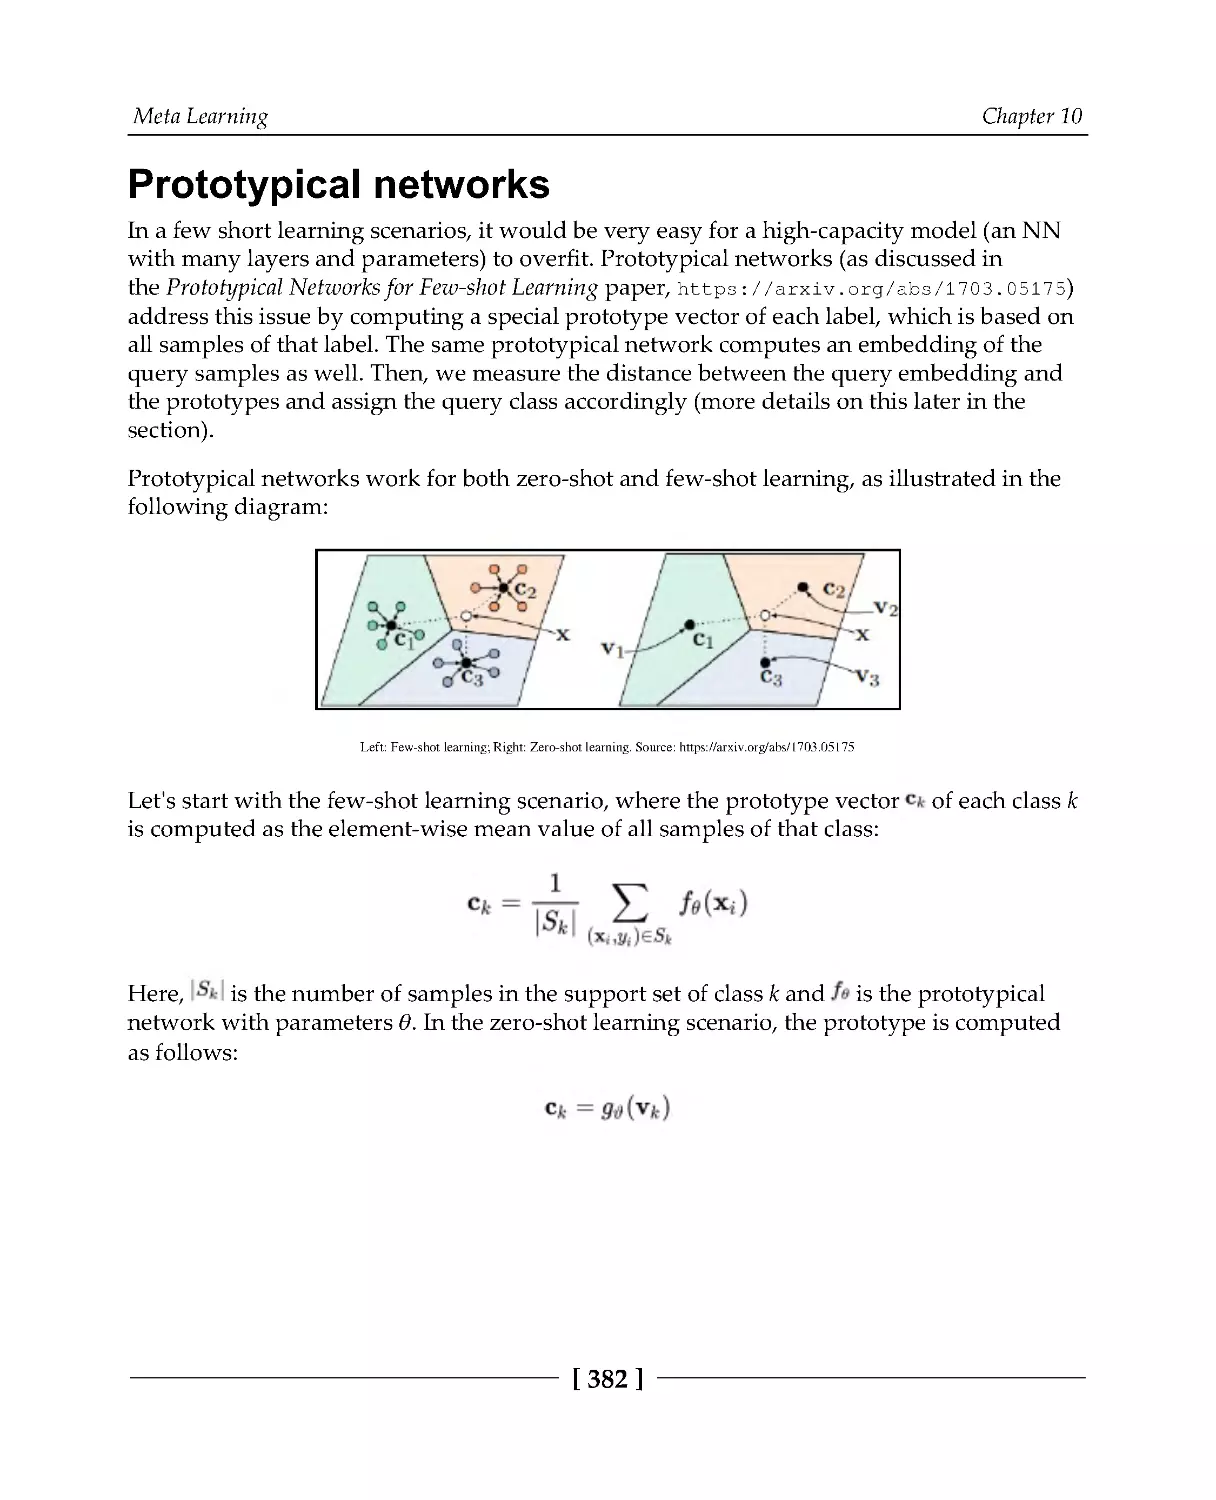 Prototypical networks